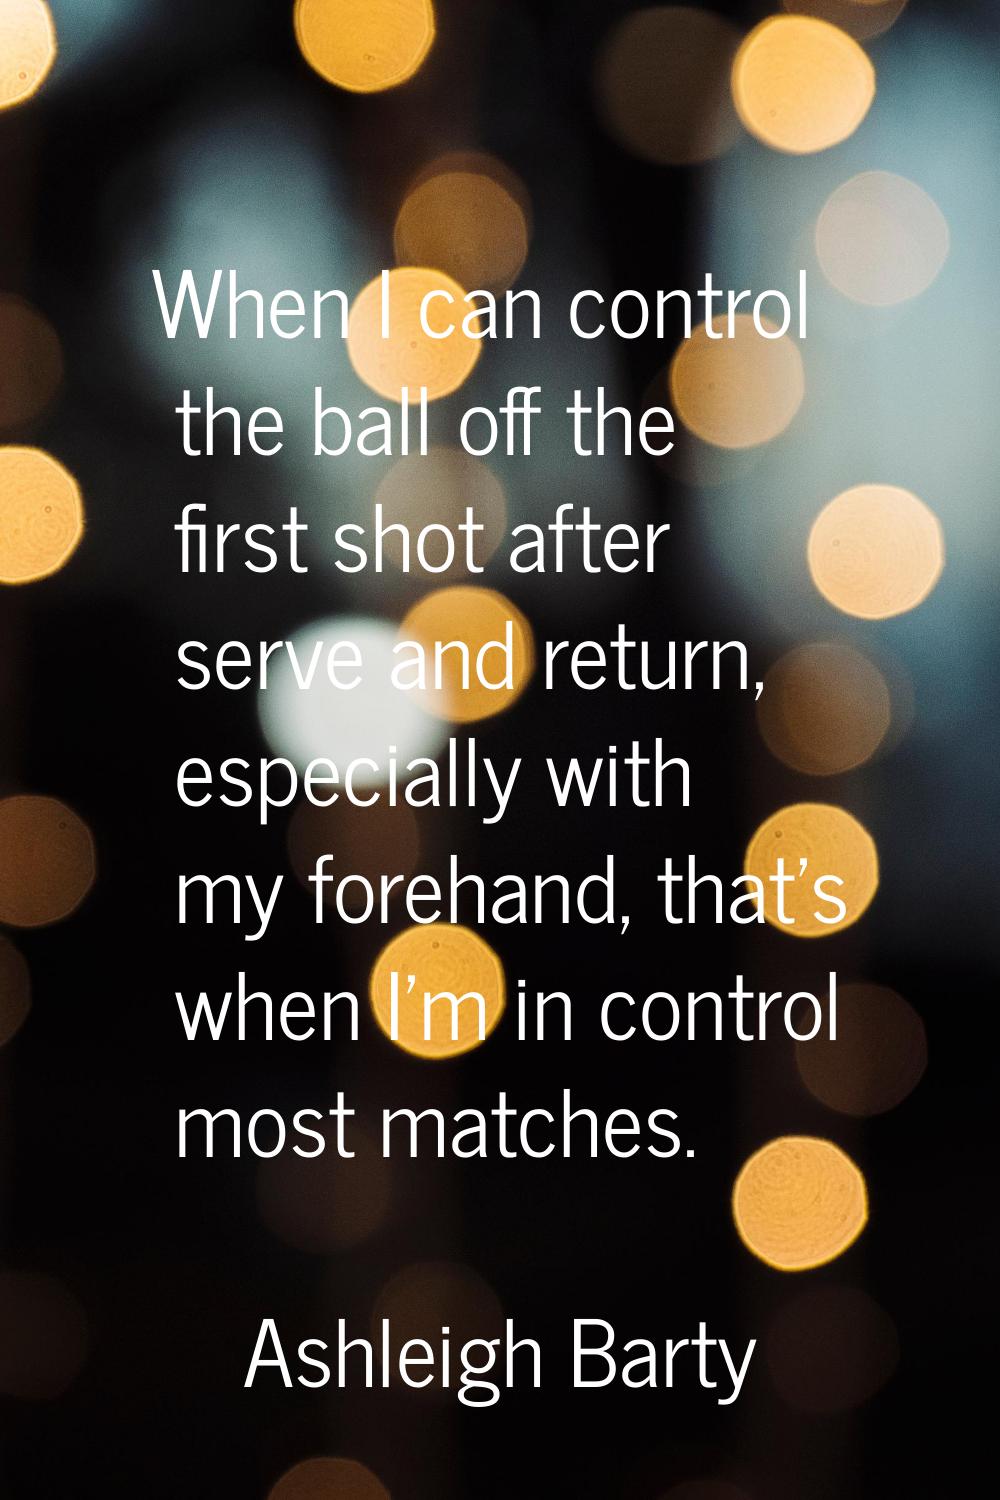 When I can control the ball off the first shot after serve and return, especially with my forehand,